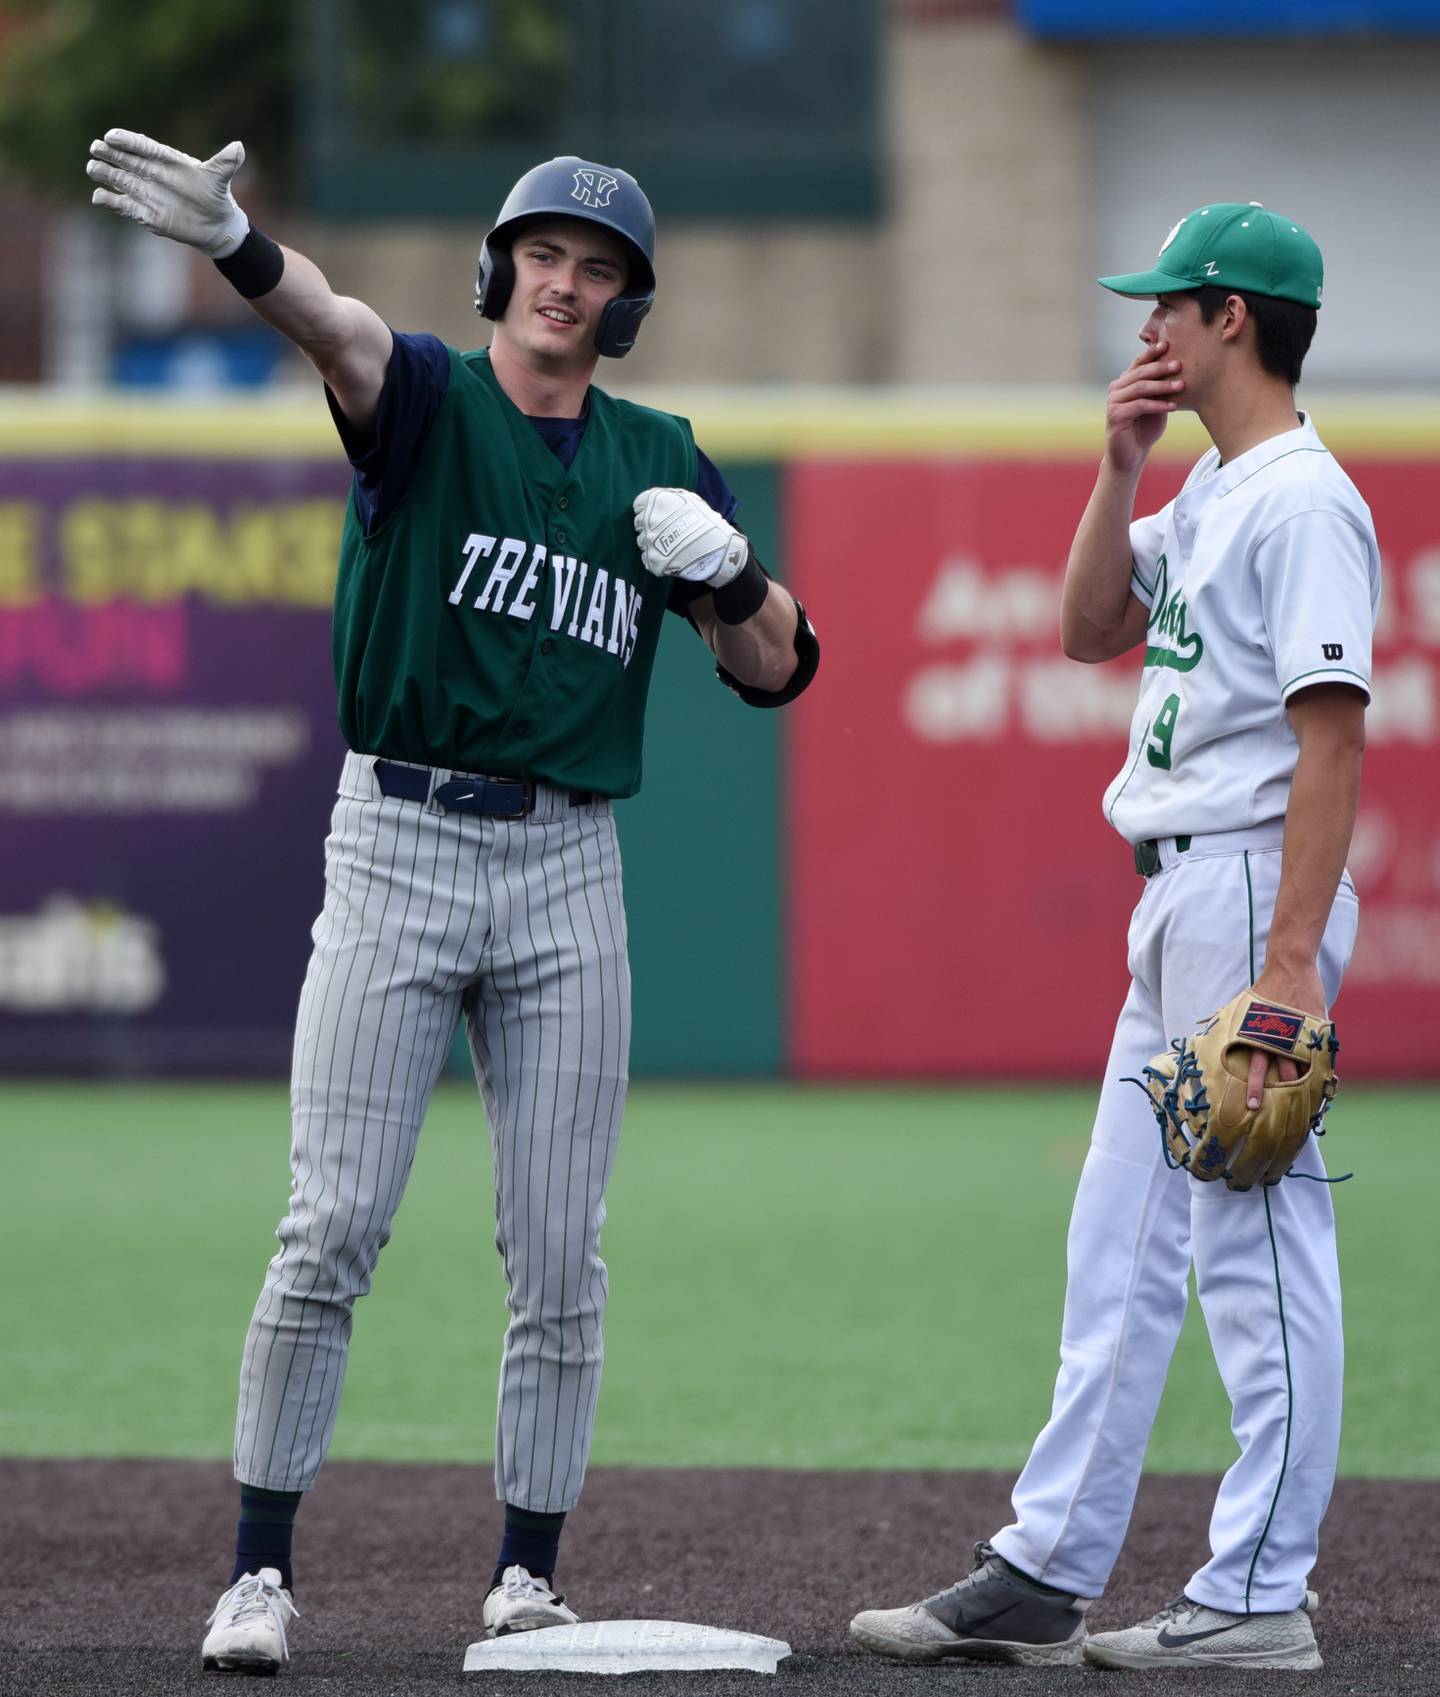 Joe Lewnard/jlewnard@dailyherald.com
New Trier’s Dylan Mayer, left, celebrates a double as York second baseman Brian Filosa stands by the base during the Class 4A state third-place baseball game in Joliet Saturday.